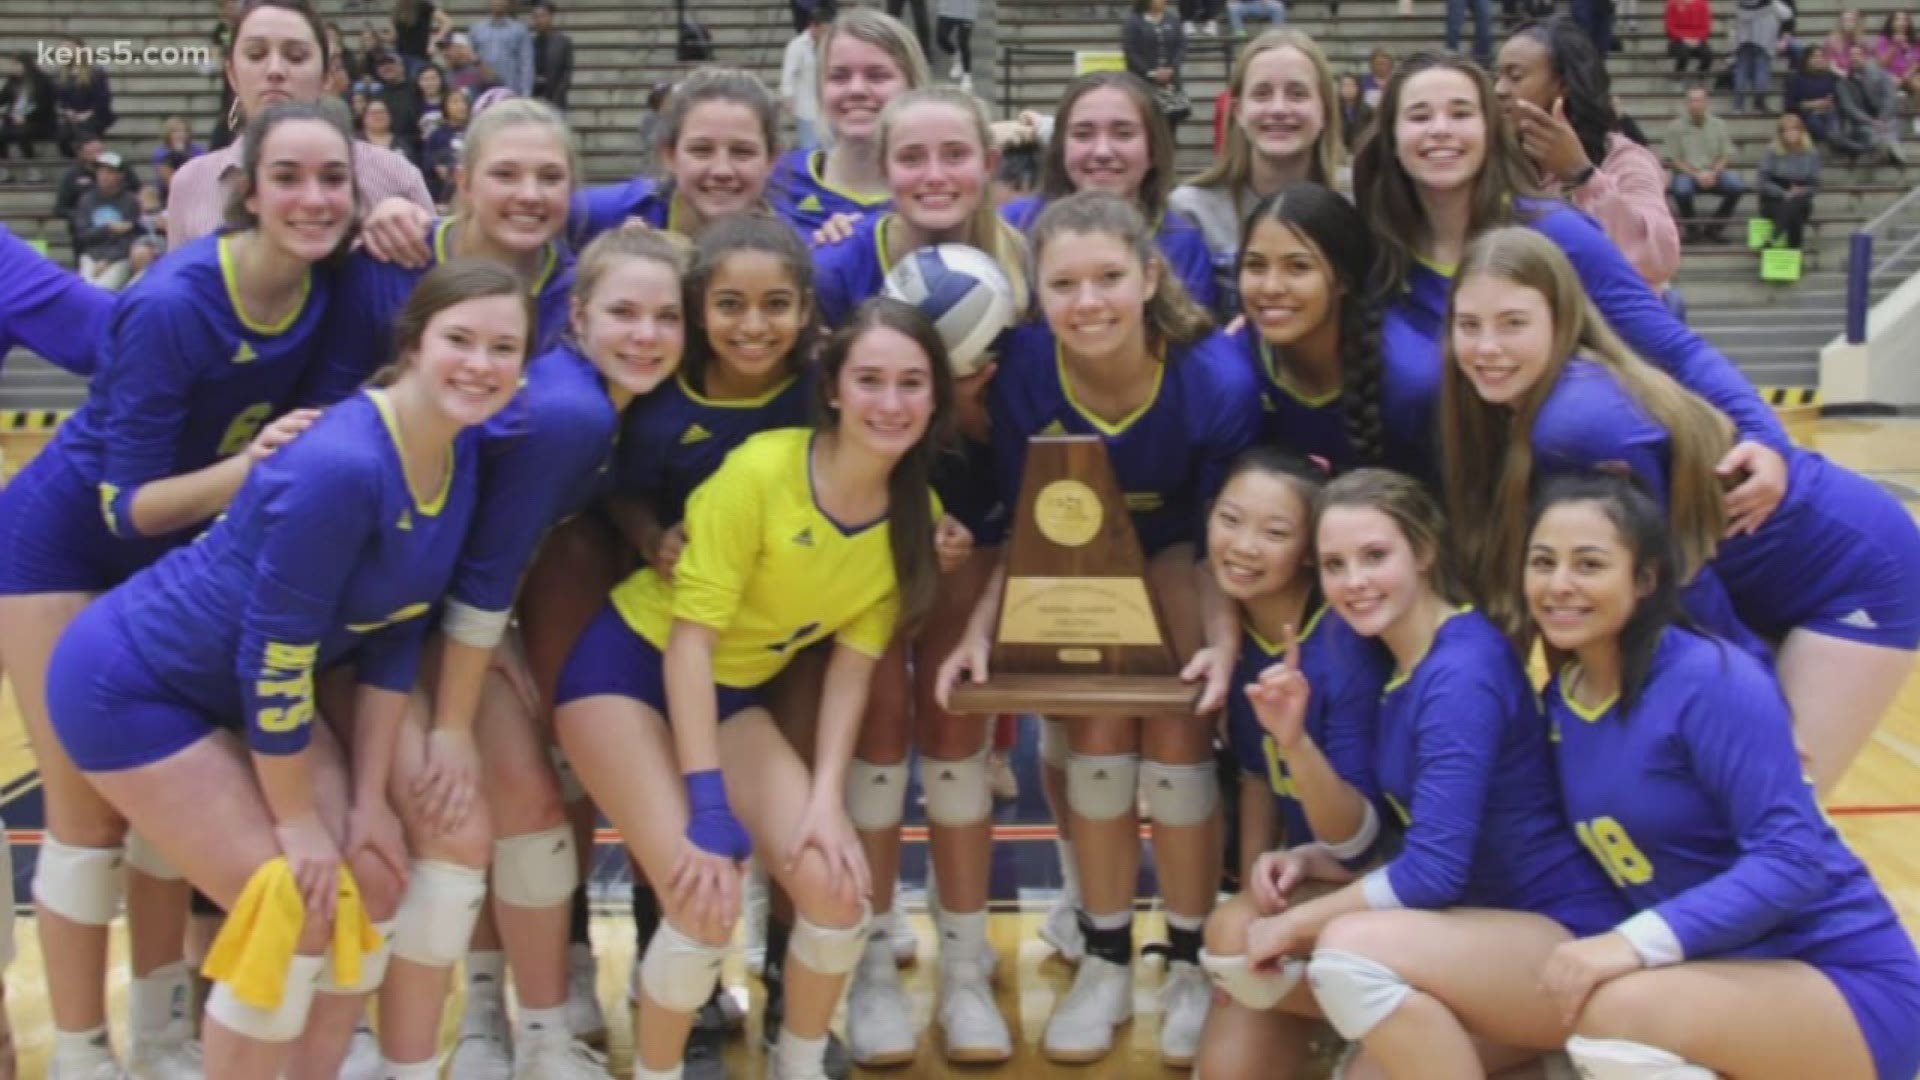 It was a dream season for the "Lady Buffs" Volleyball team. For the first time in school history, the team made the state volleyball tournament!